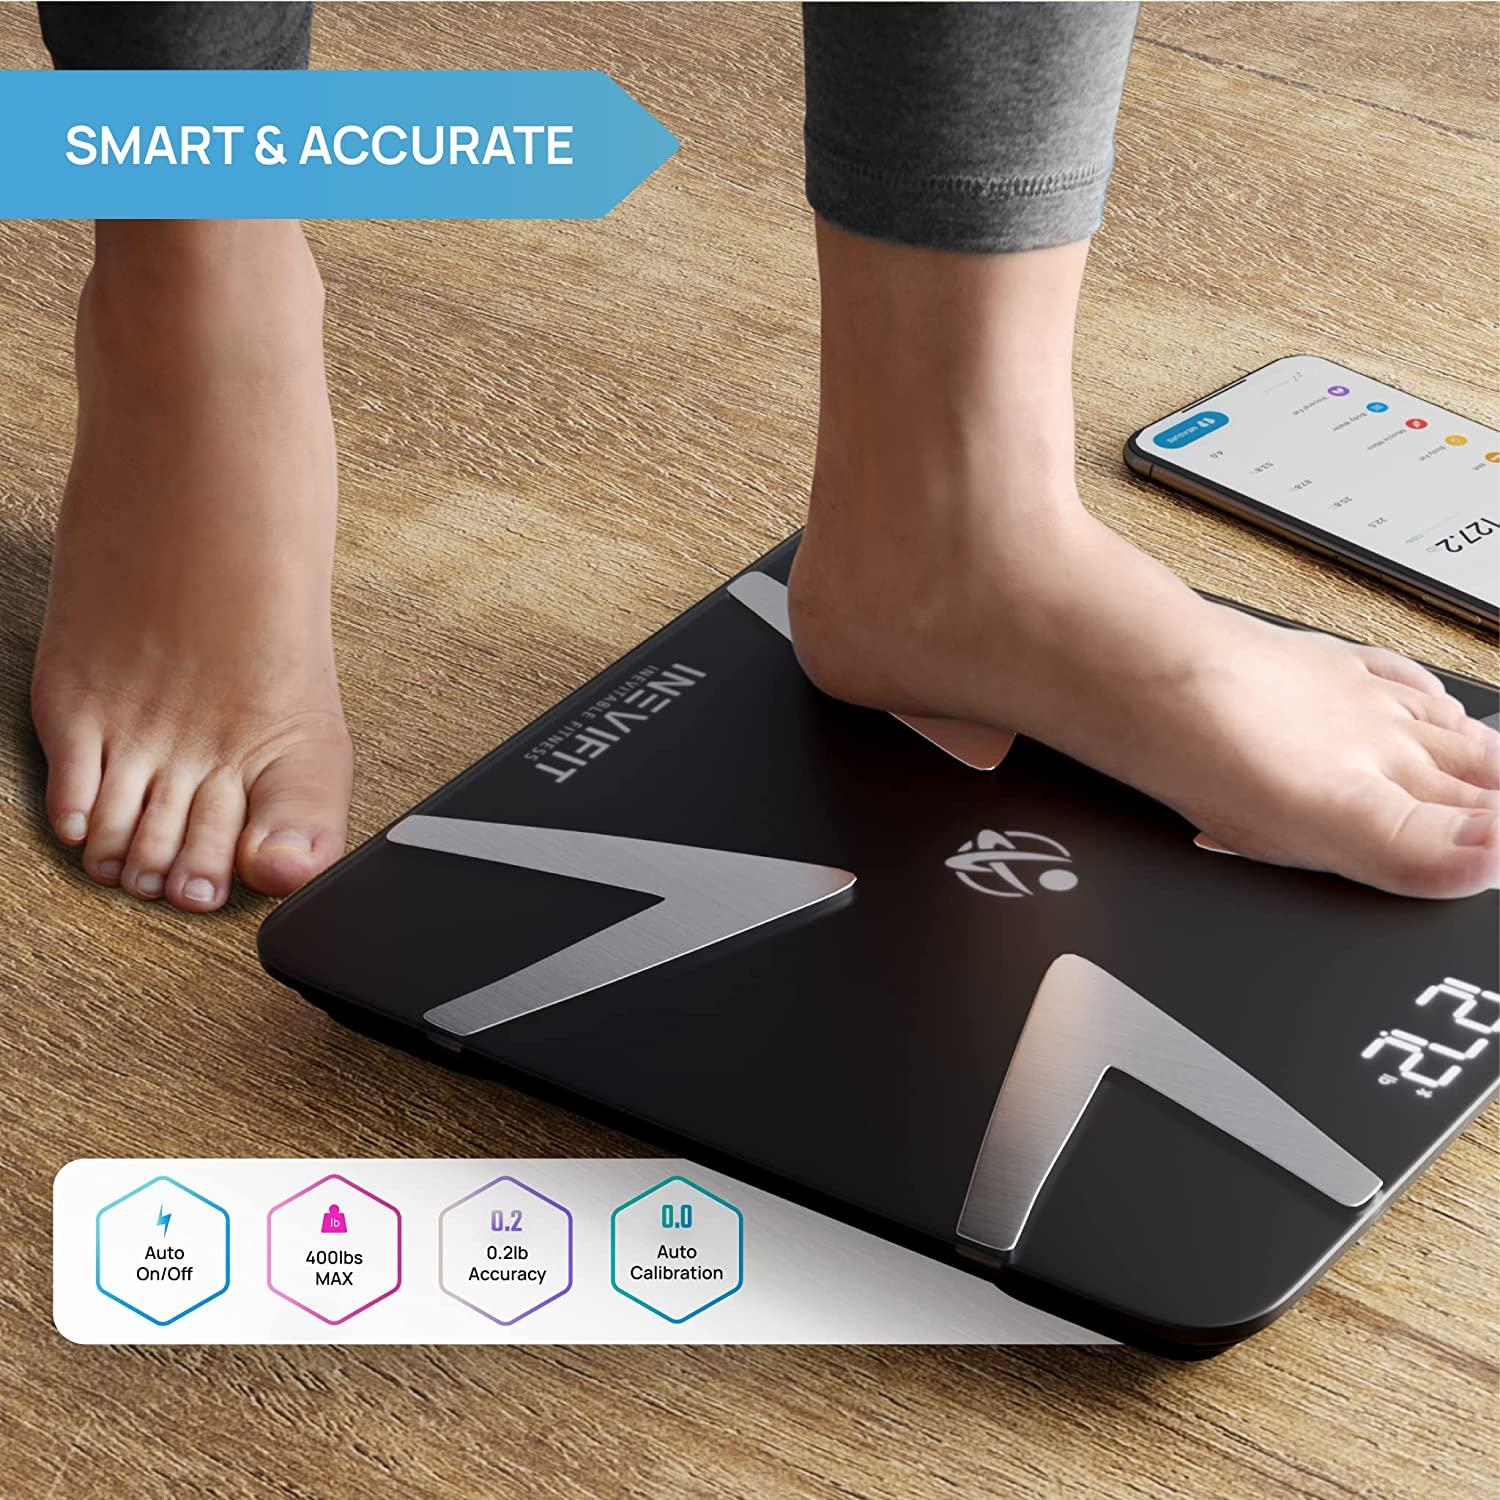 INEVIFIT Smart Body Fat Scale, Highly Accurate Bluetooth Digital Bathroom Body  Composition Analyzer, Measures Weight, Body Fat, Water, Muscle, BMI,  Visceral Fat & Bone Mass for Unlimited Users Black